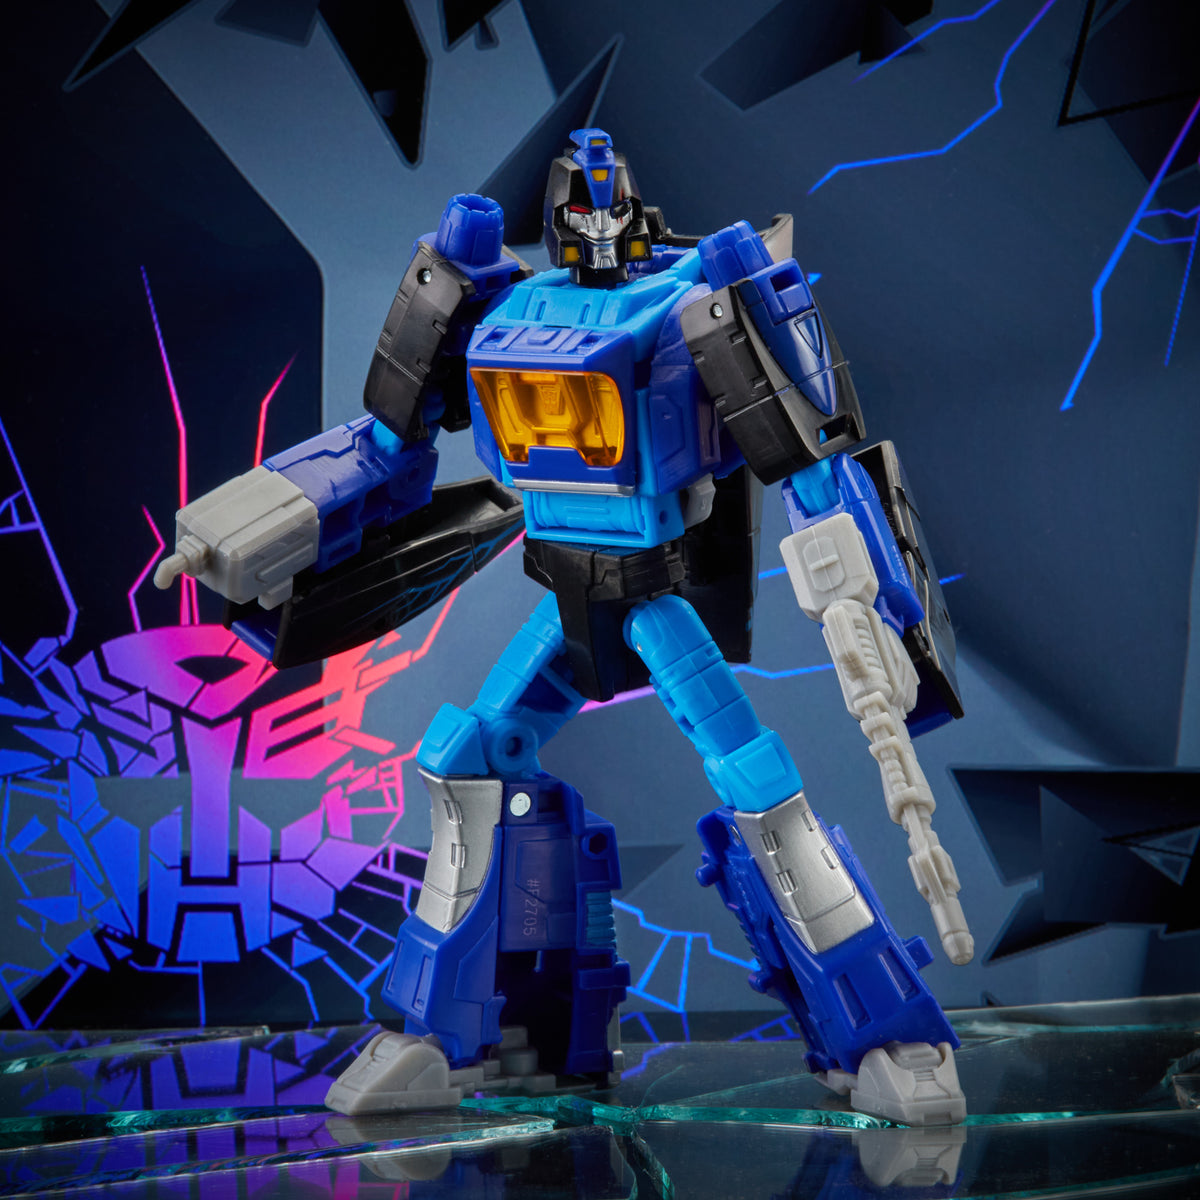 Transformers Generations Shattered Glass Collection Blurr & IDW's